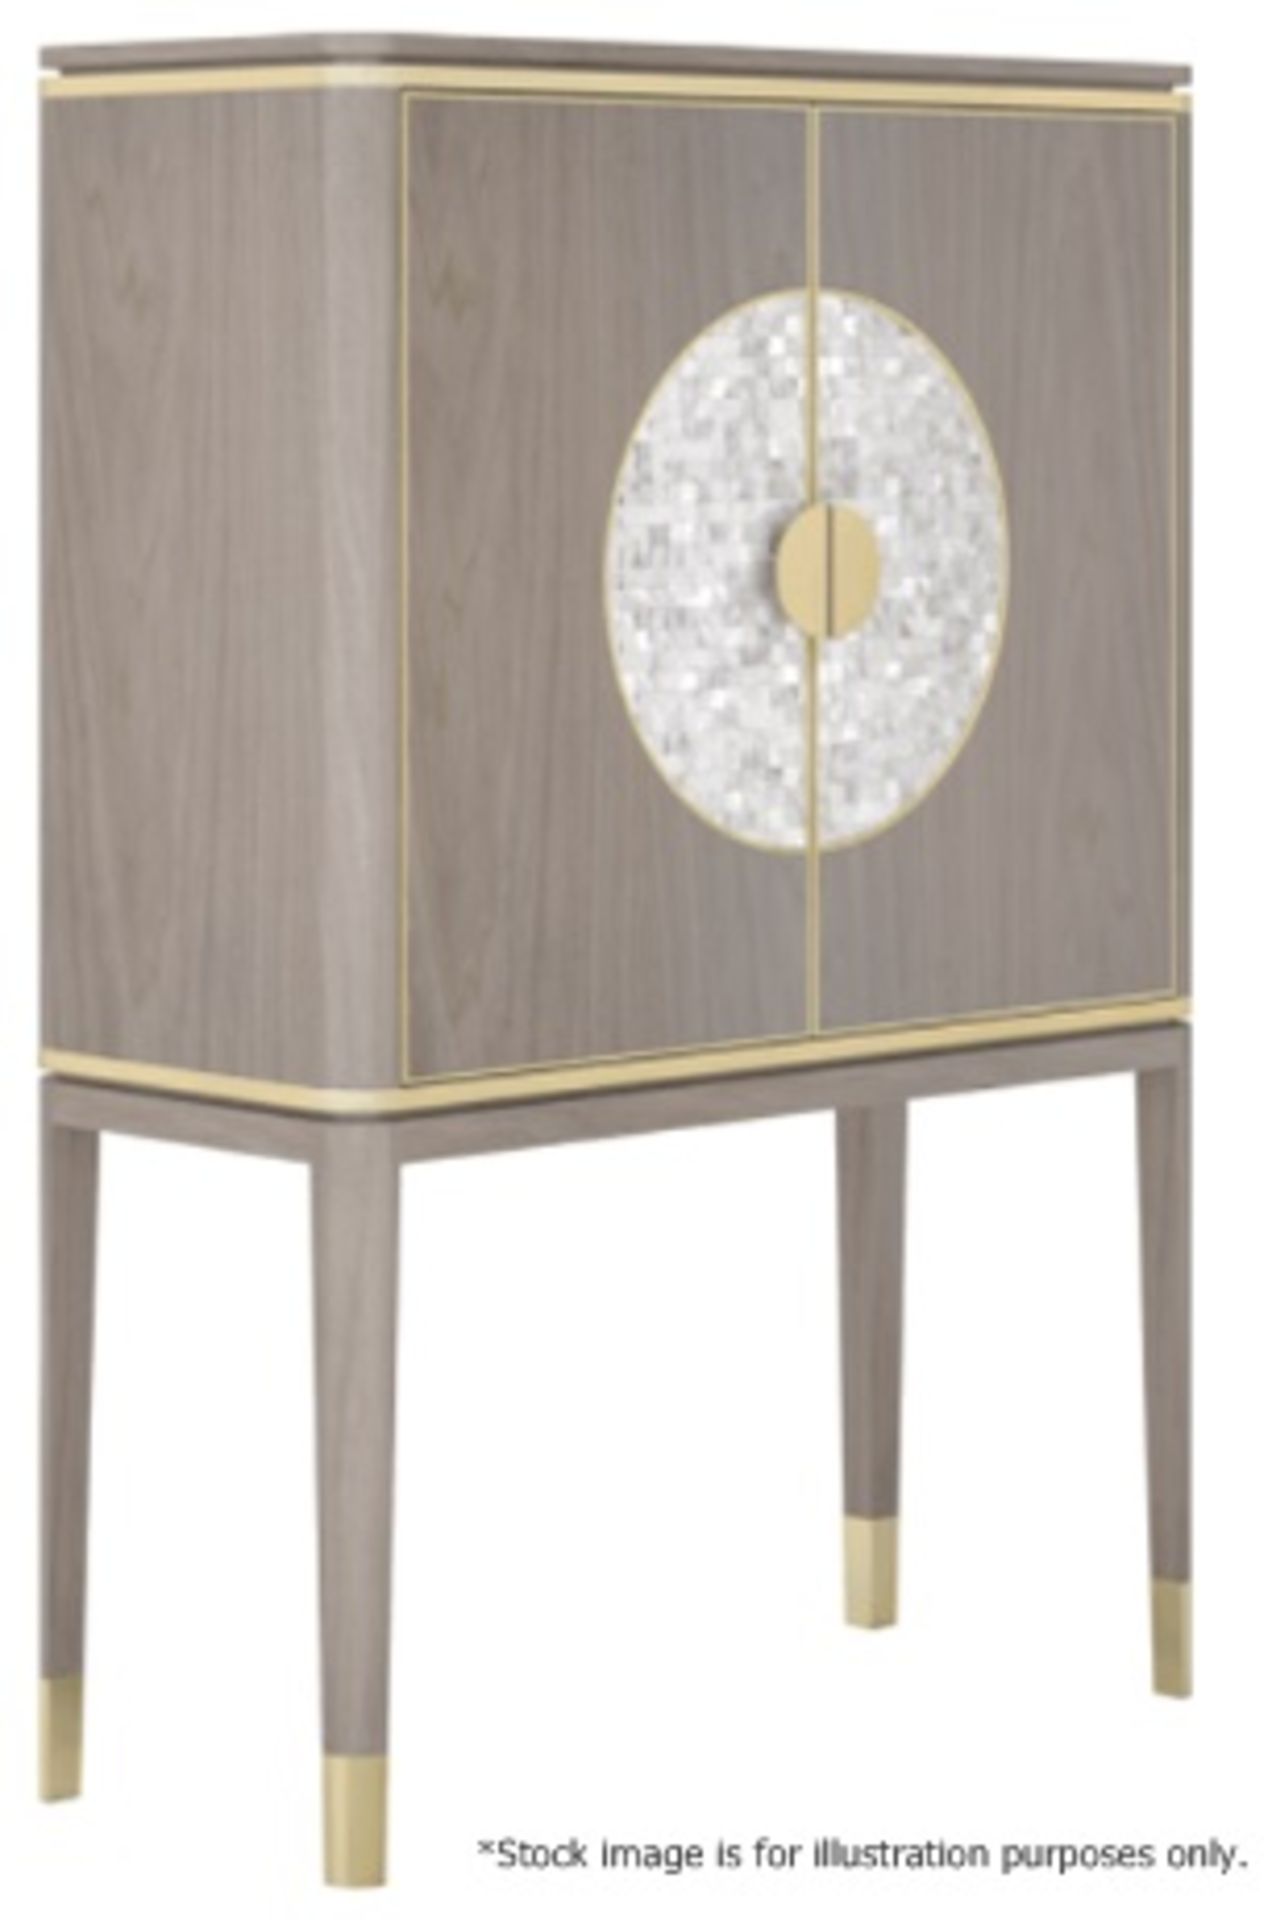 1 x FRATO 'Seville' Luxury Designer 2-Door Tall Cabinet With A High Gloss Finish - RRP £7,968 - Image 12 of 15